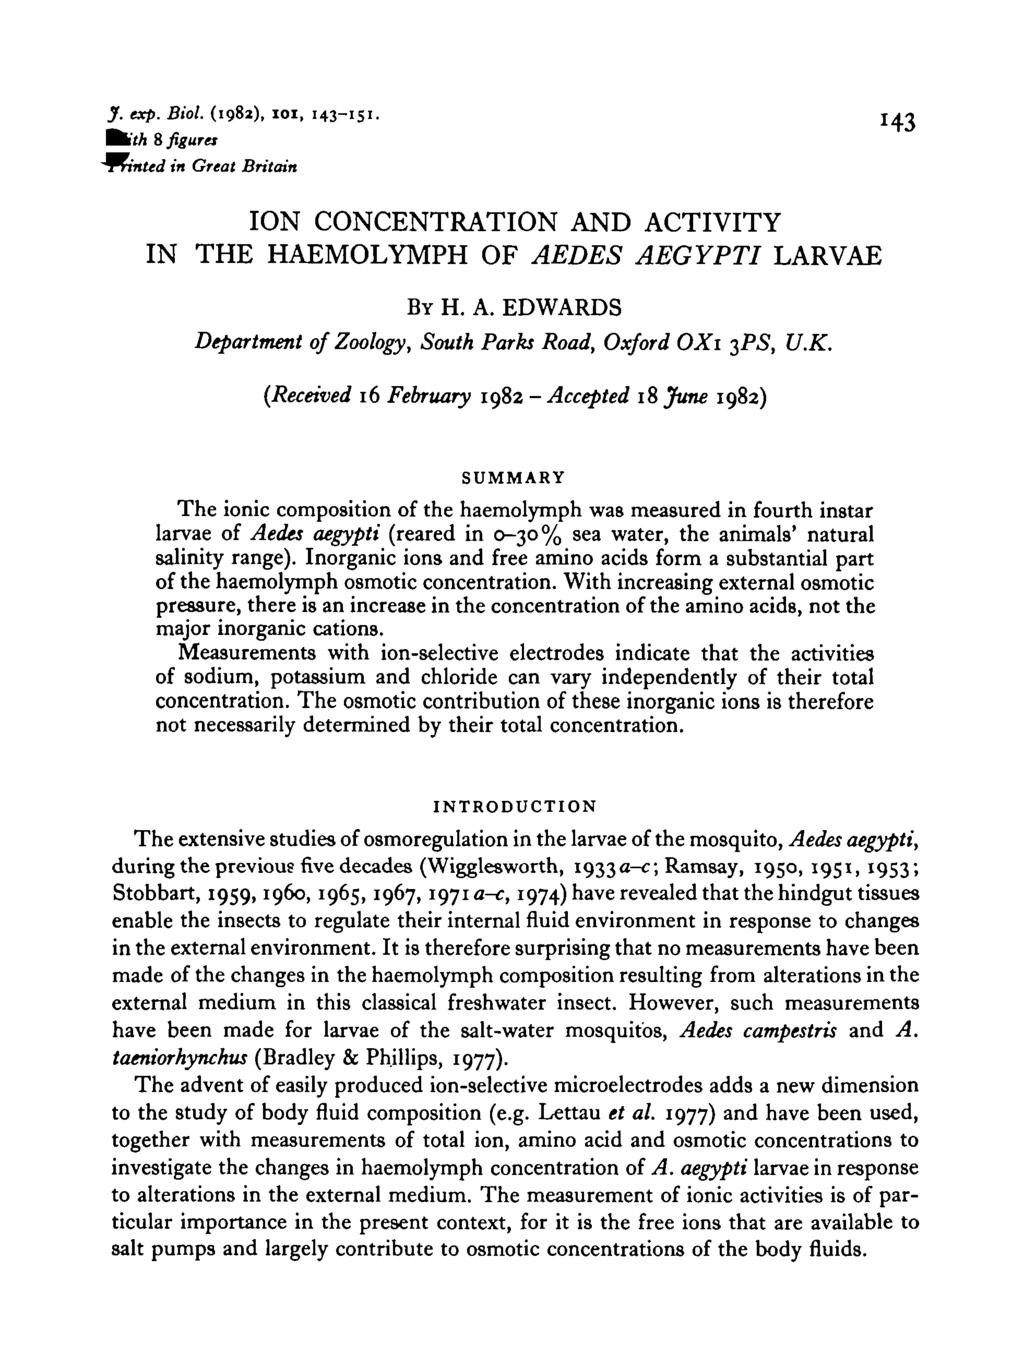 J. exp. Biol. (1982), IOI, 143-151- ^ith & figures in Great Britain ION CONCENTRATION AND ACTIVITY IN THE HAEMOLYMPH OF AEDES AEGYPTI LARVAE BY H. A. EDWARDS Department of Zoology, South Parks Road, Oxford OXi 3PS, U.